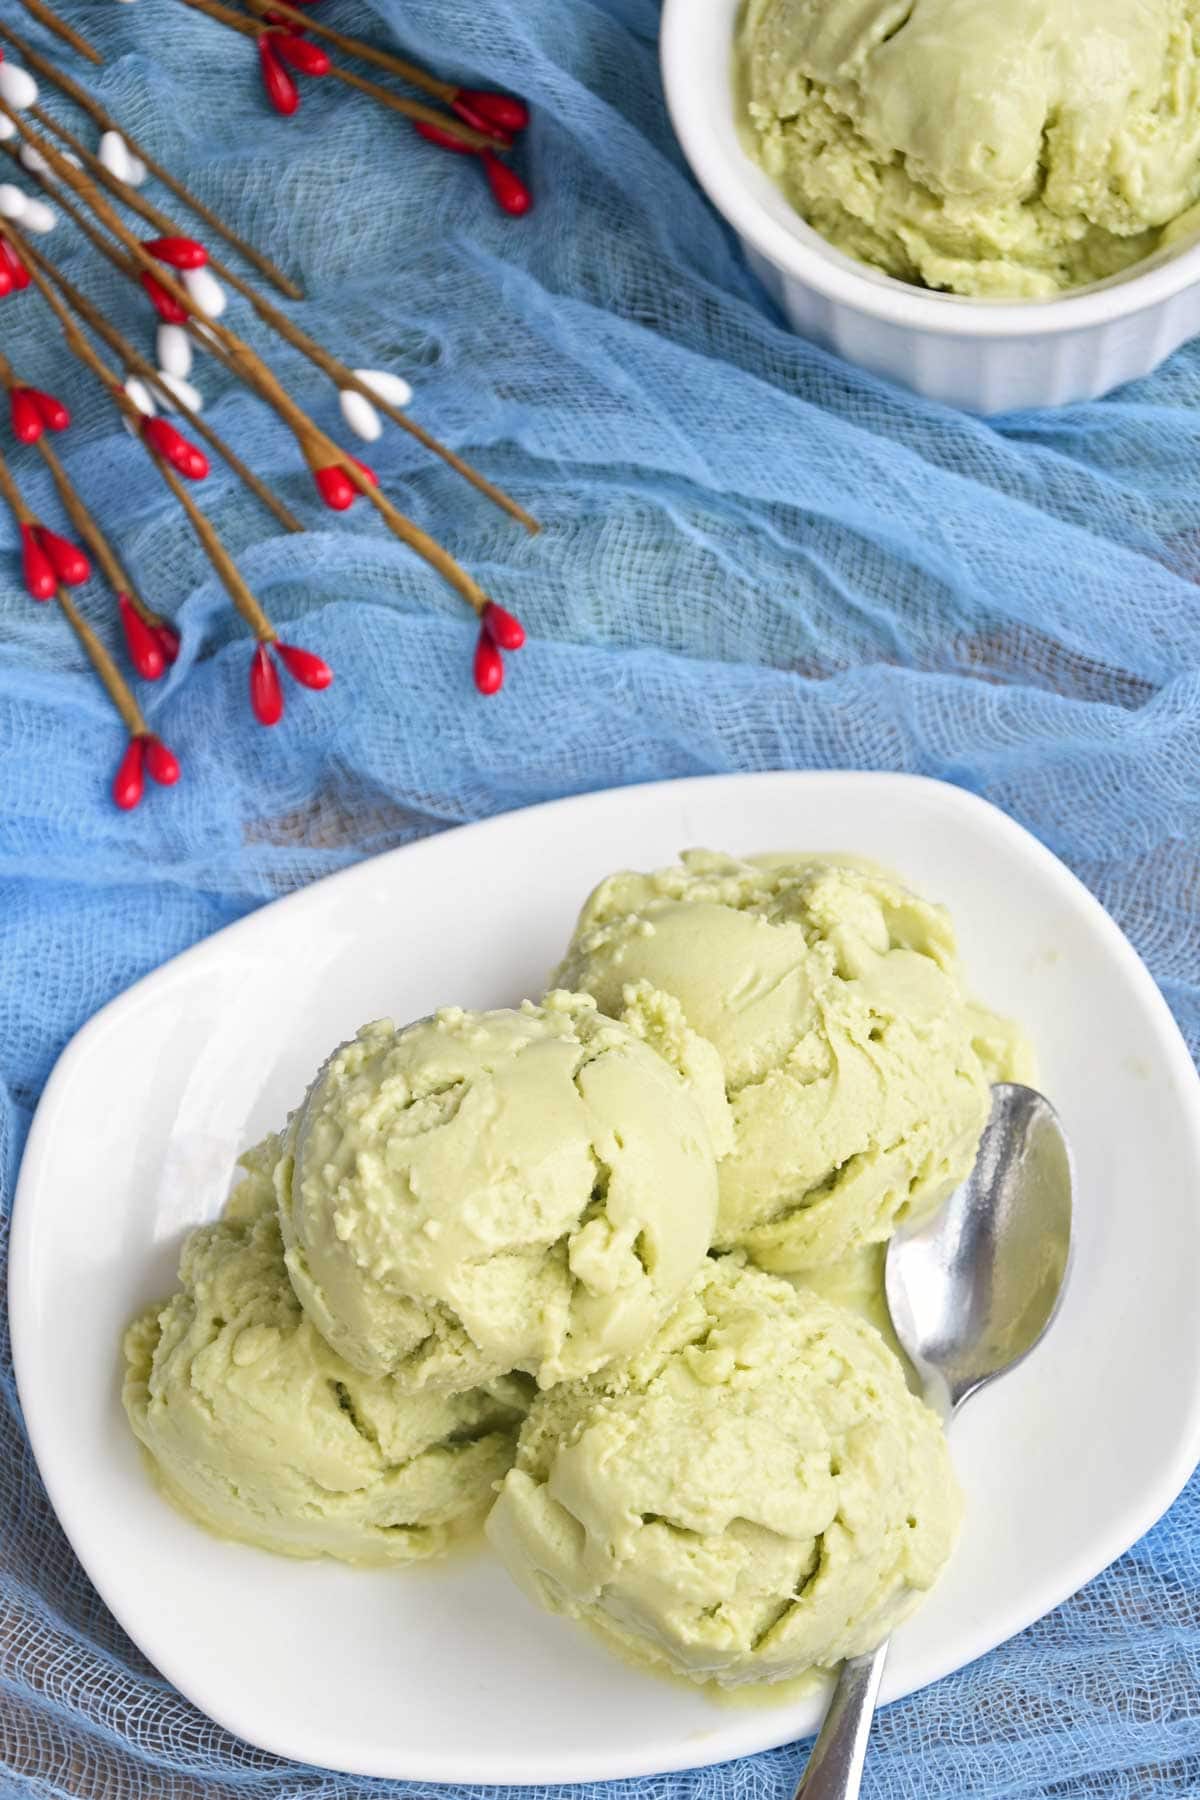 Avocado ice cream scoops in a plate.